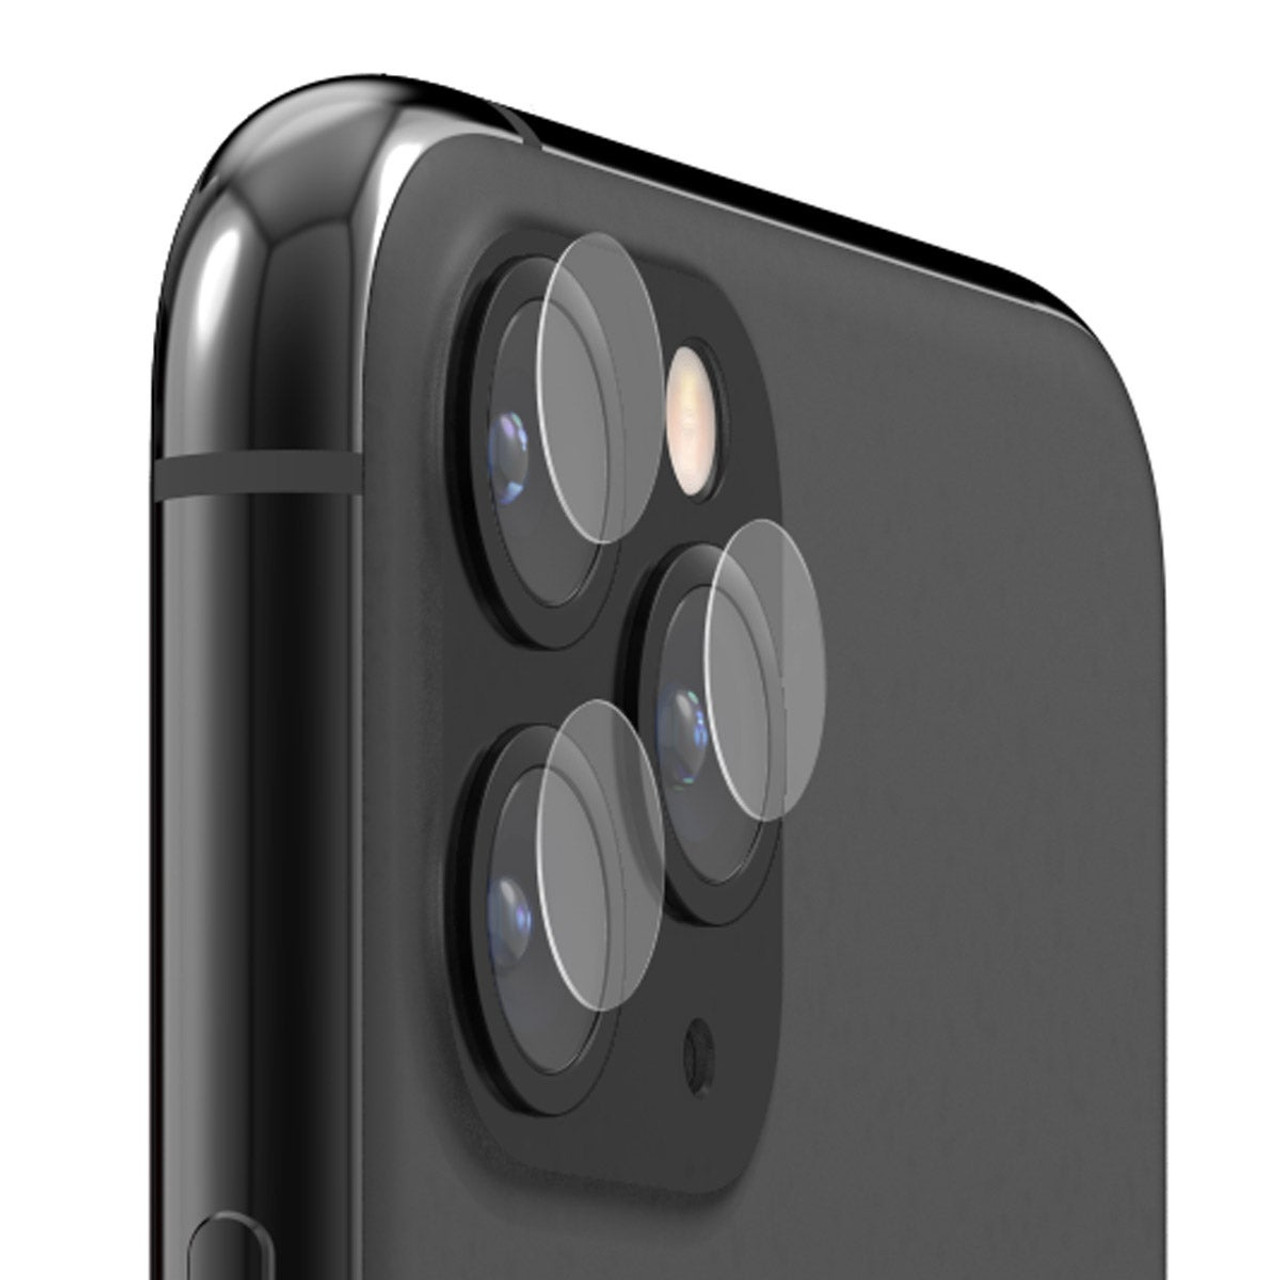 Camera Lens Cover Compatible for iPhone 11 Pro/iPhone 11 Pro Max, Camera  Lens Protector Protect Your Privacy and Security,Strong Adhesive,2 Pack